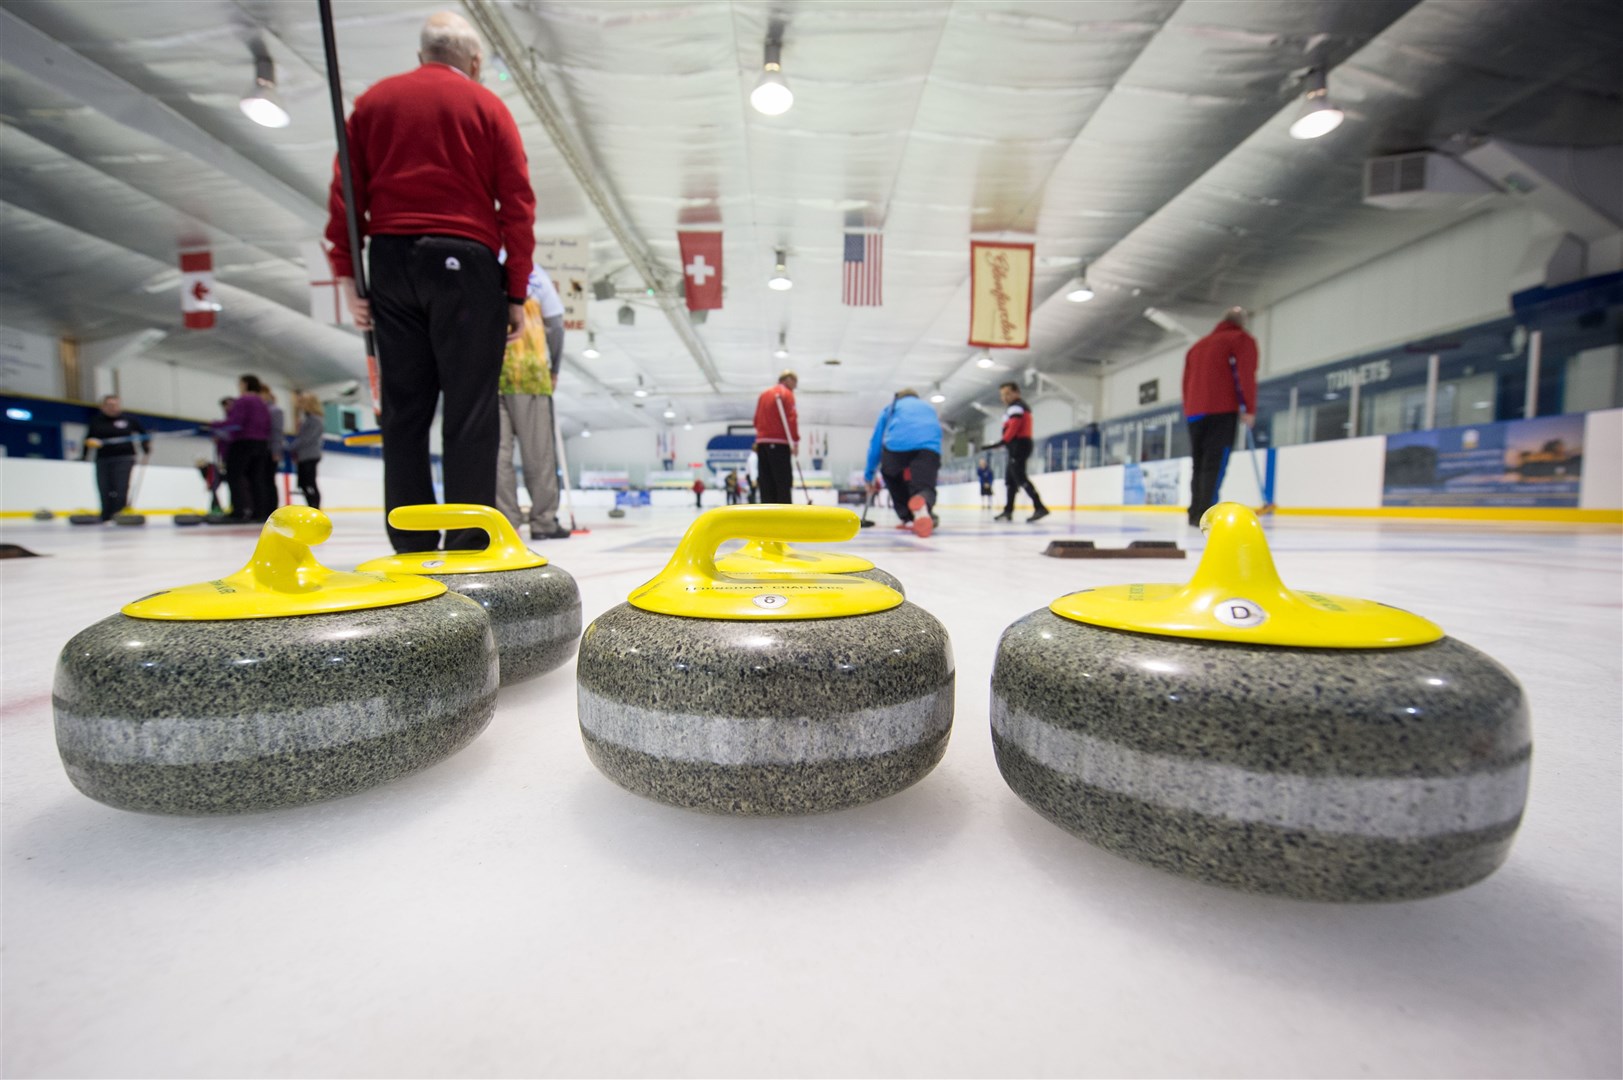 Fochabers Curling Club celebrated their 150th anniversary by welcoming curlers from all over Scotland to the Inverness Ice Centre. Picture: Callum Mackay